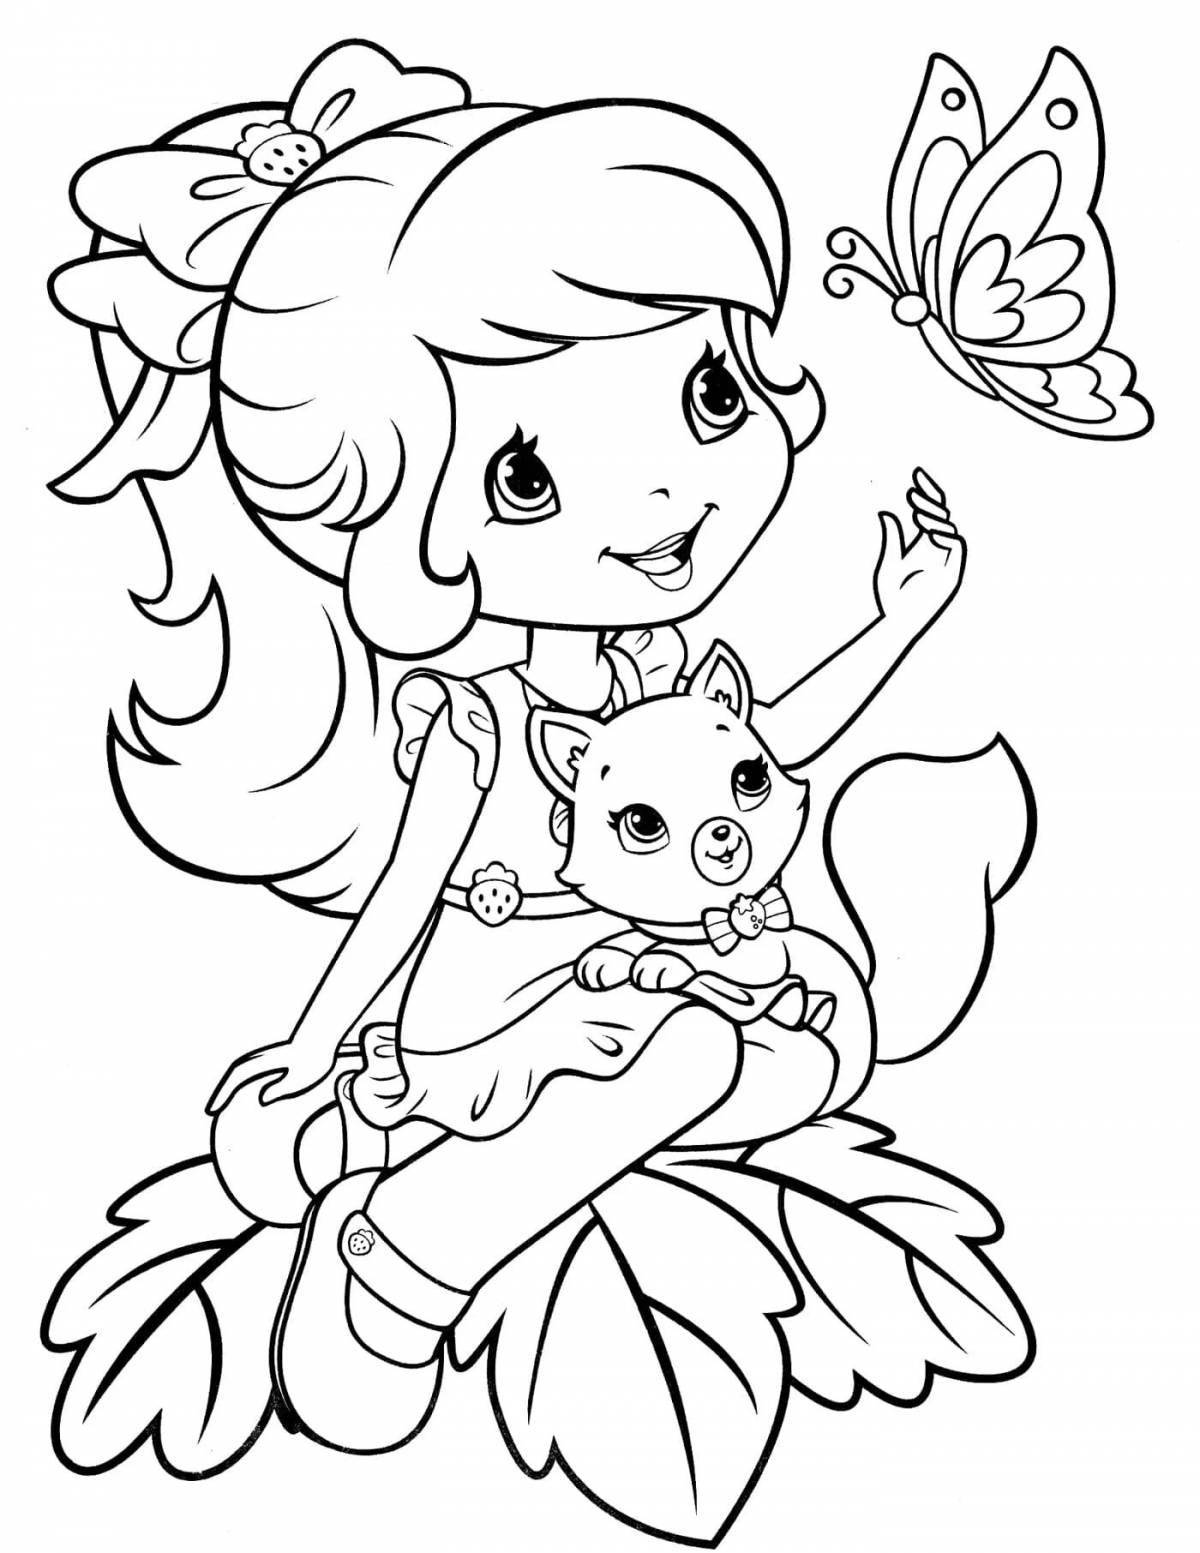 Adorable coloring book popular with girls